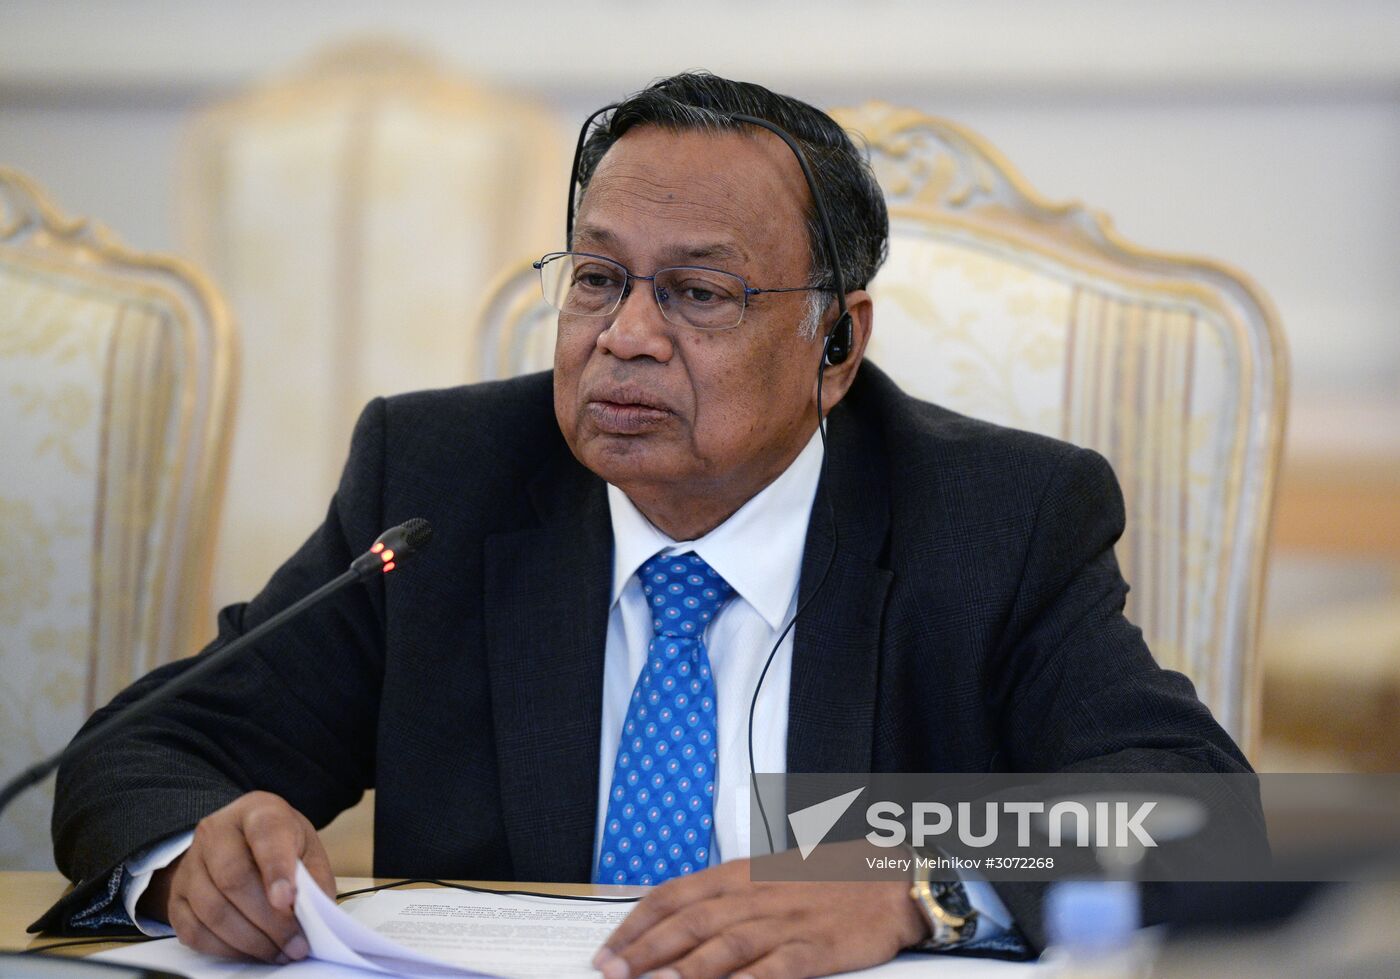 Russian Foreign Minister Sergei Lavrov meets with Foreign Minister of Bangladesh Abul Hassan Mahmud Ali